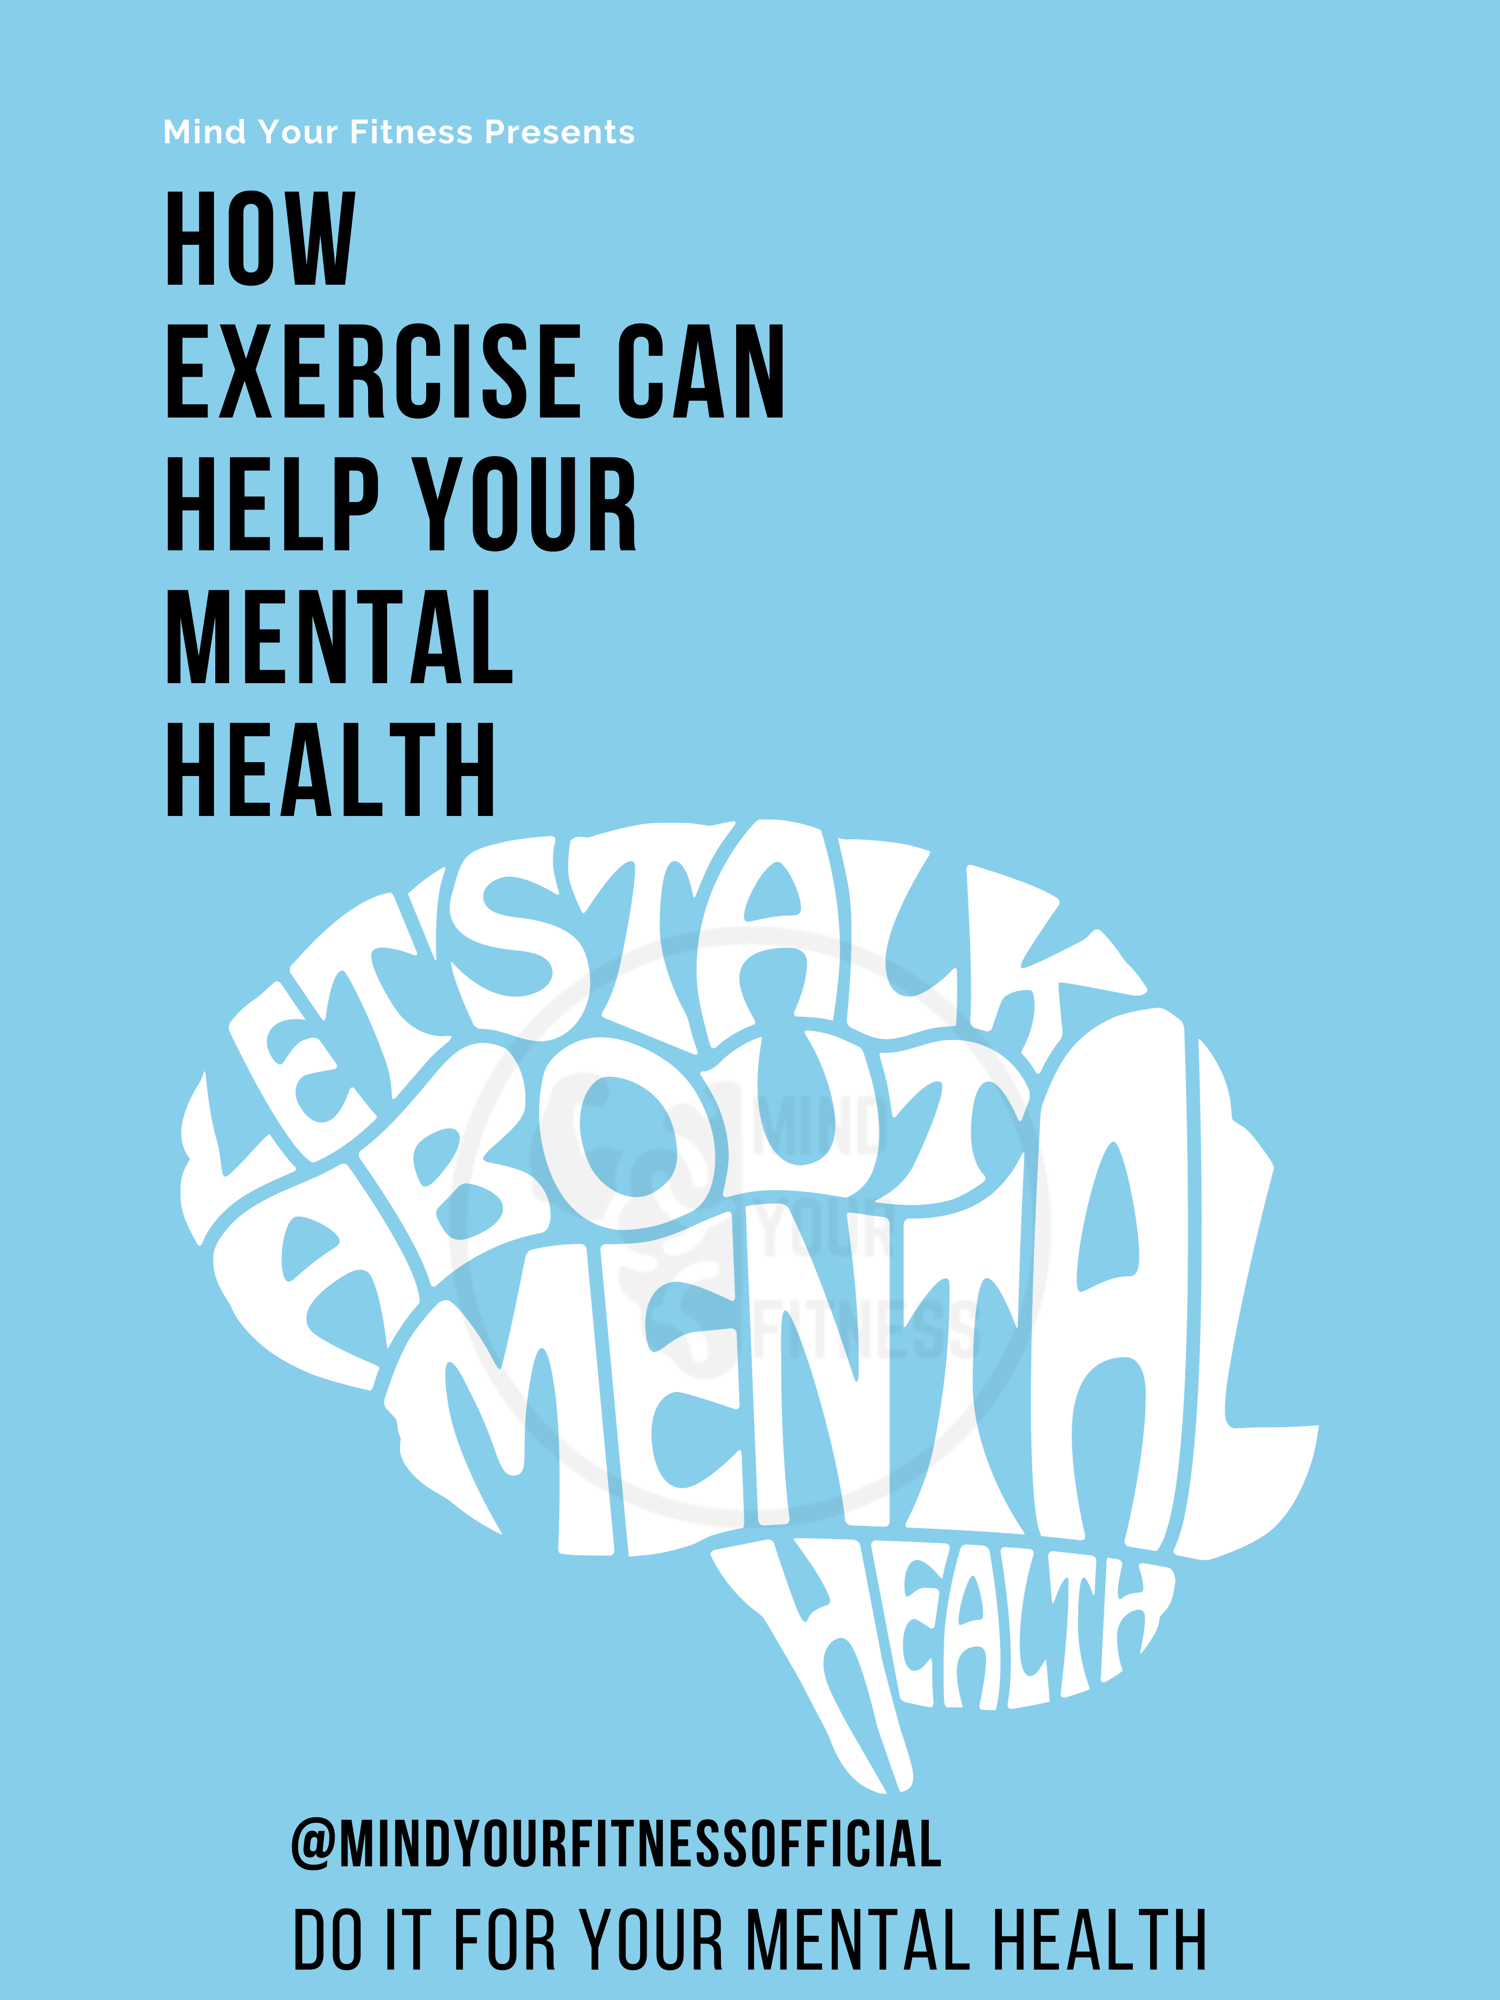 How exercise can help your mental health